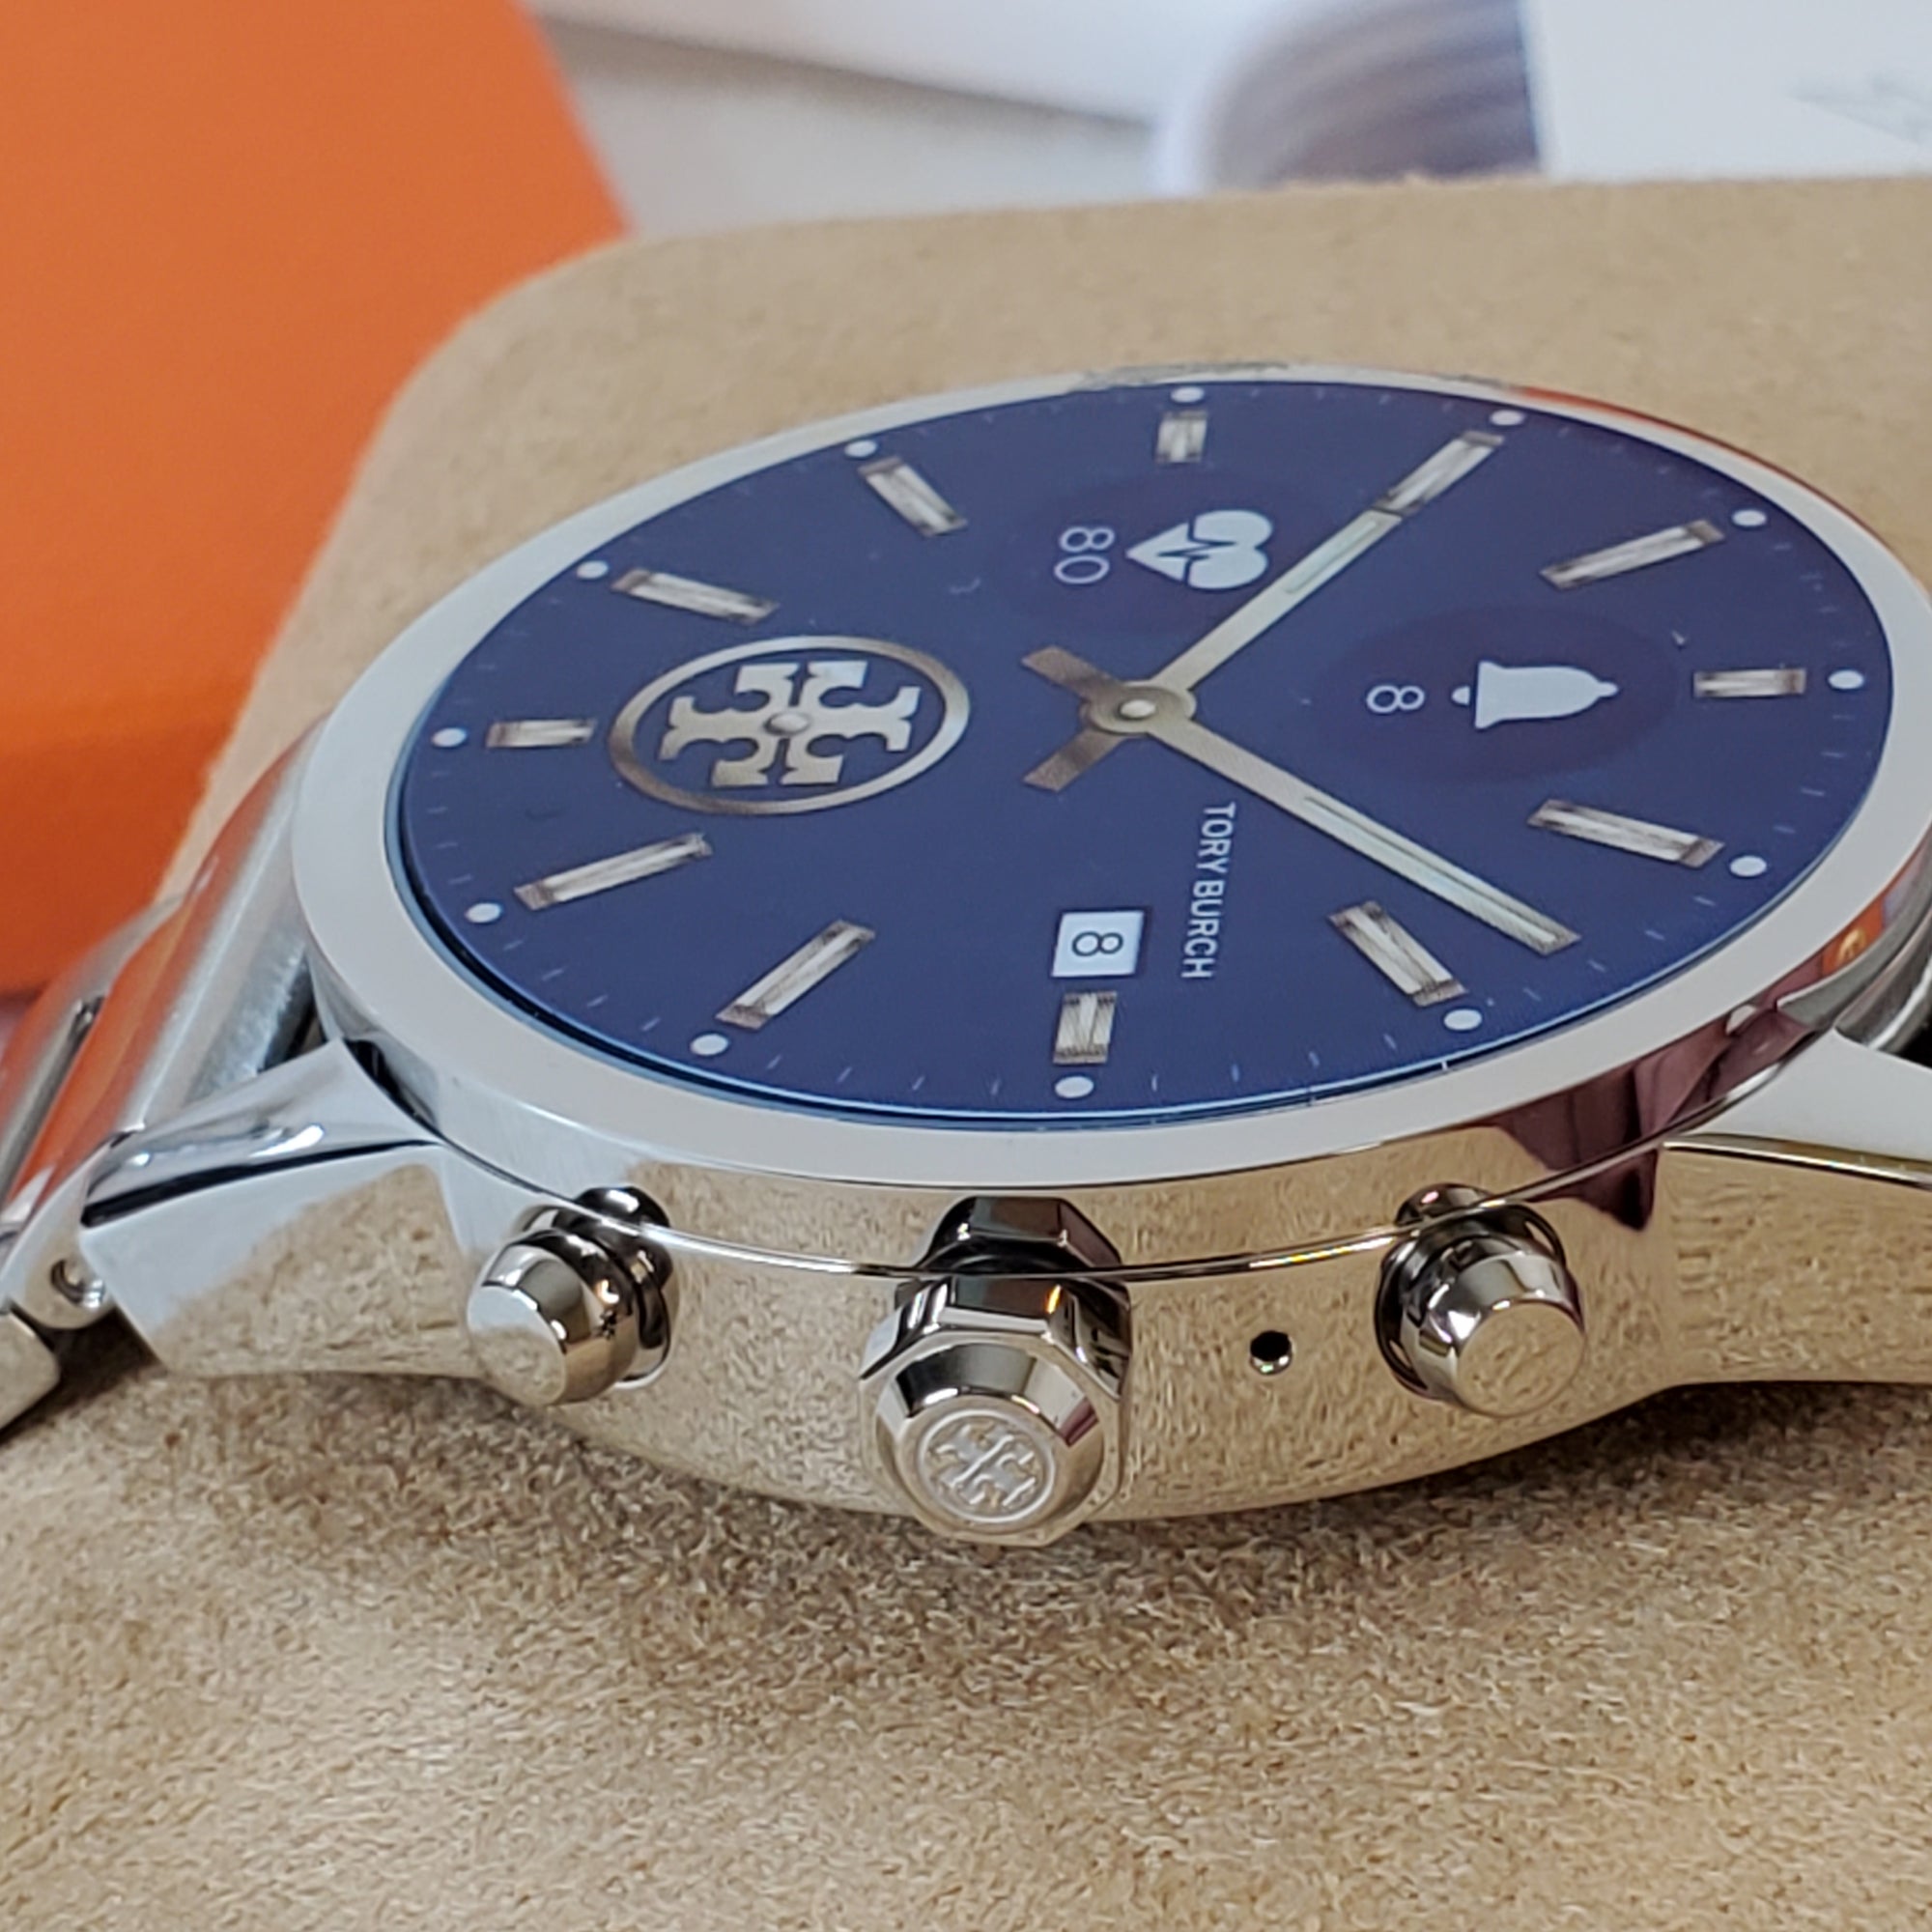 Tory Burch Smartwatches are here